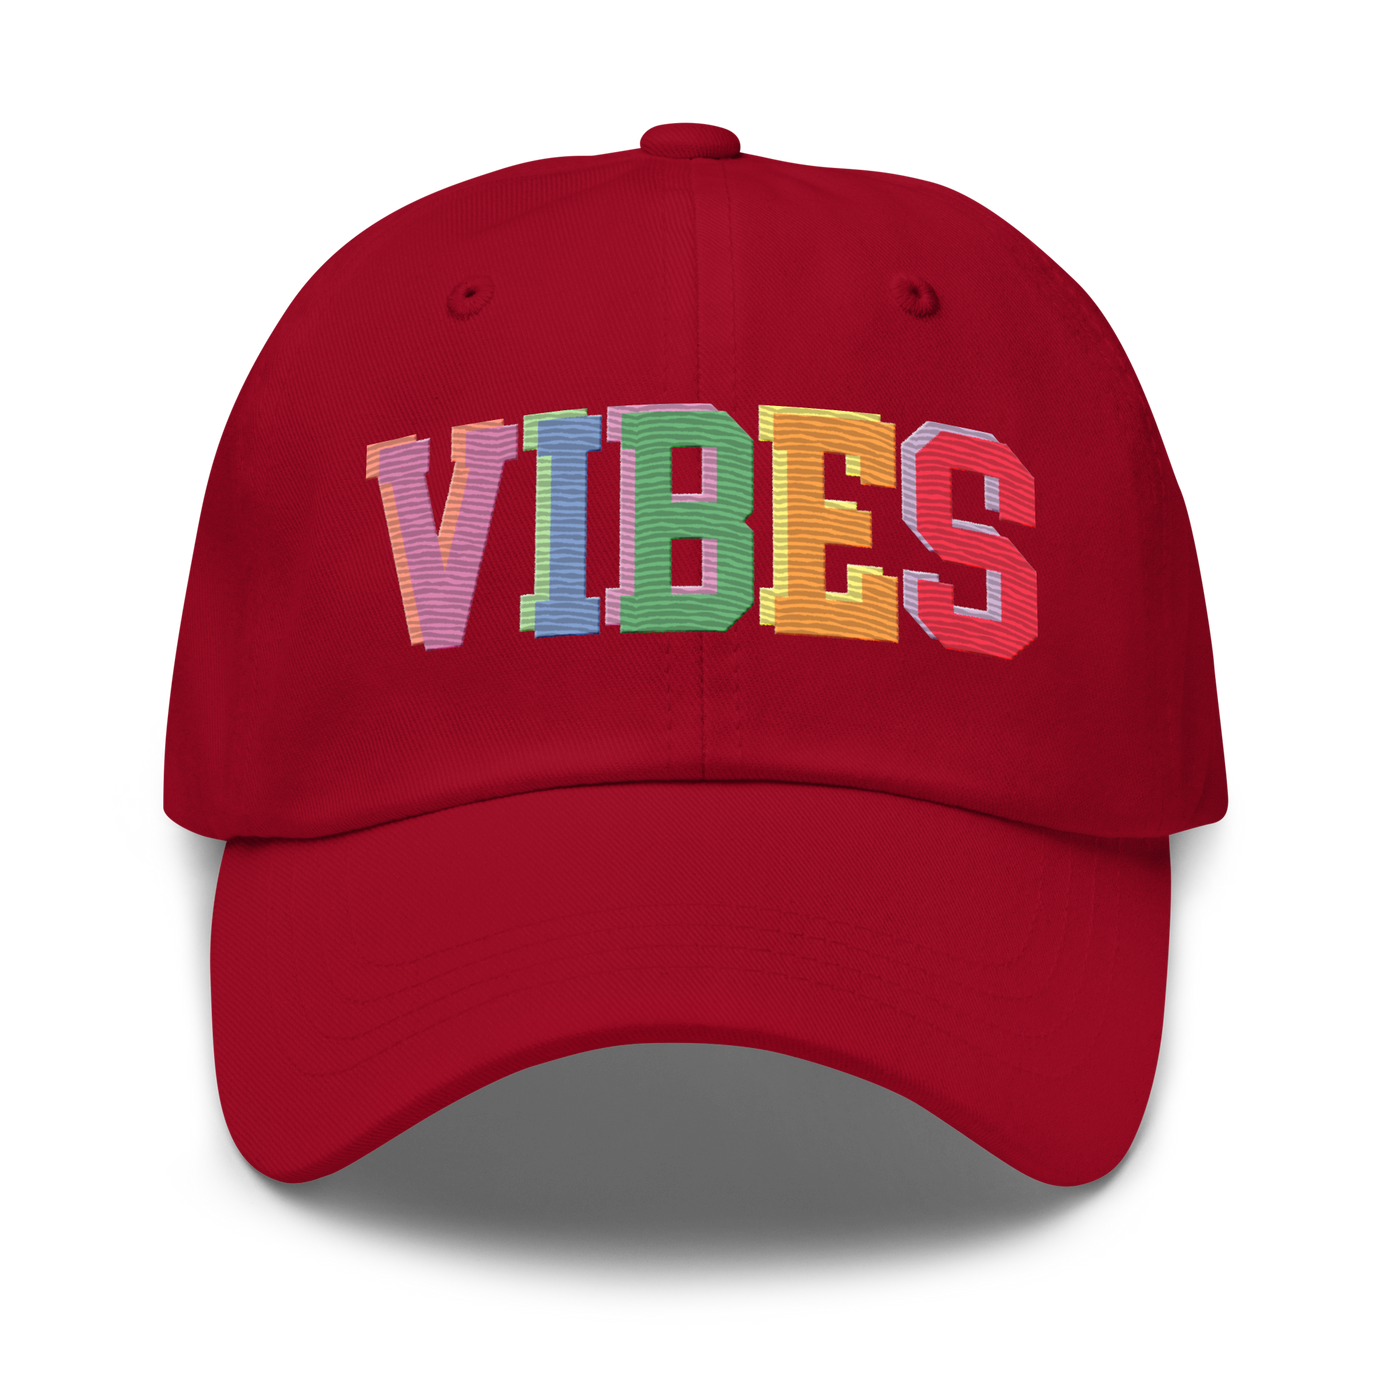 'Vibes' Embroidered Hat